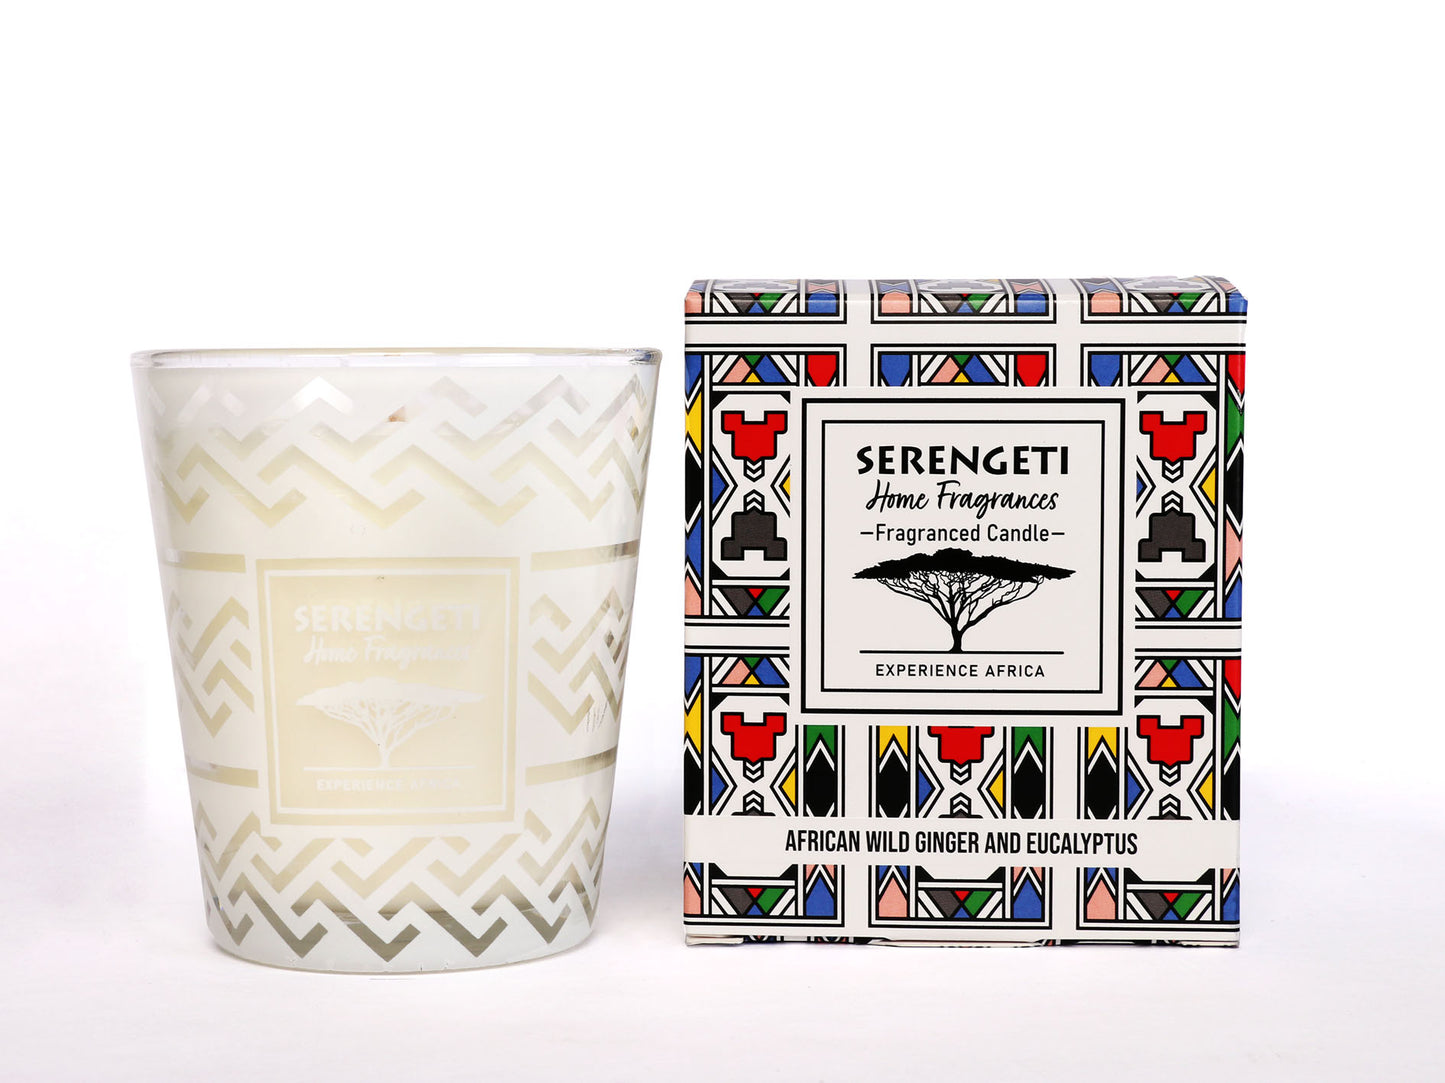 African Wild Ginger & Eucalyptus Fragranced Candle 270g